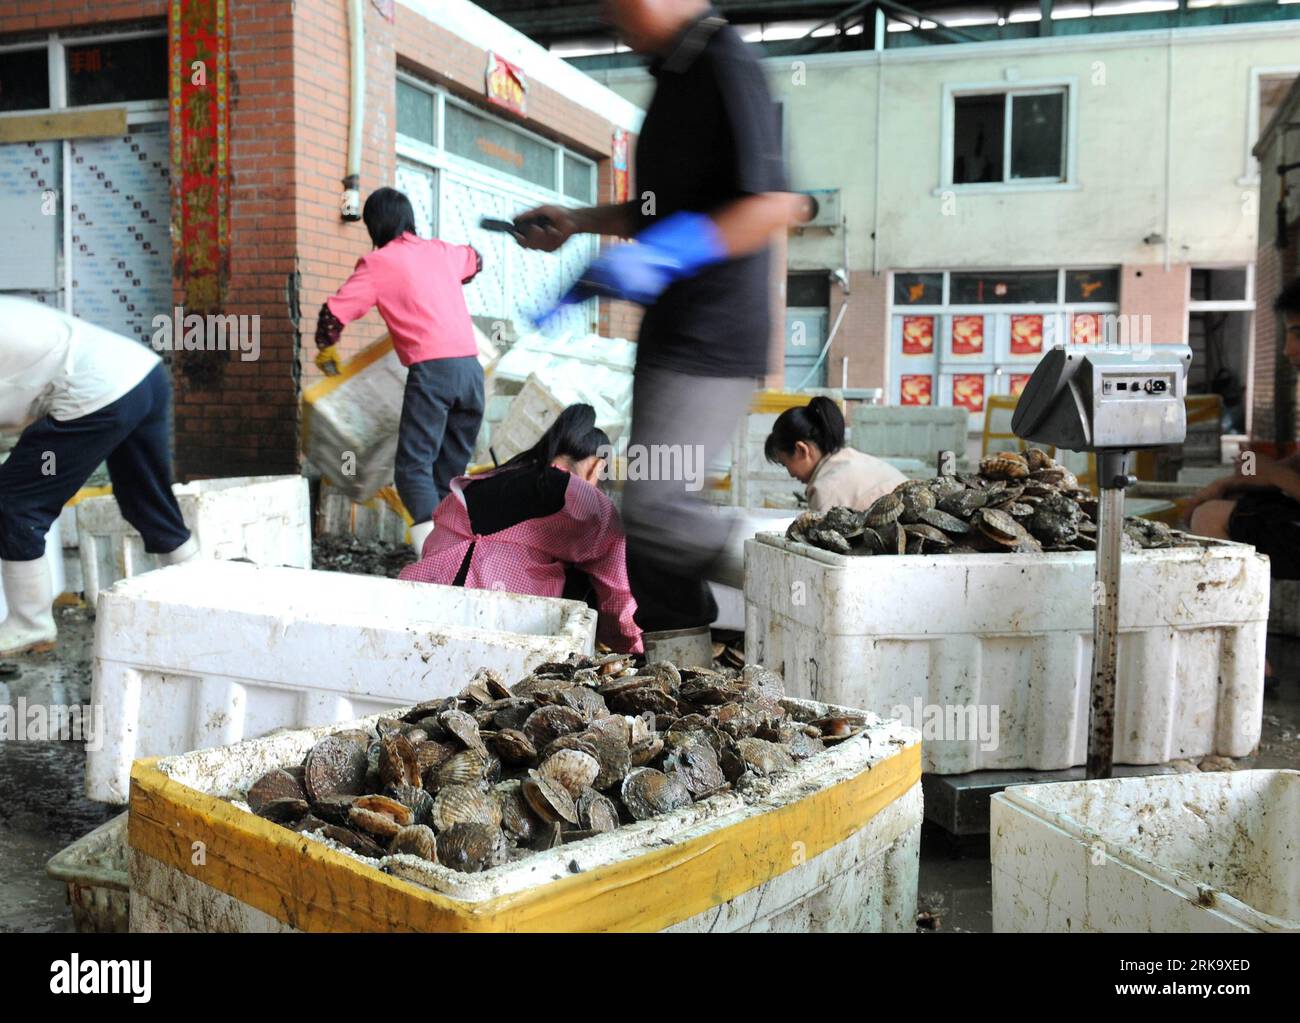 Bildnummer: 54242204  Datum: 20.07.2010  Copyright: imago/Xinhua (100720) -- DALIAN, July 20, 2010 (Xinhua) -- Workers in a seafood wholesale market are busy with the encasement of seafood in Dalian, a coastal city in northeast China s Liaoning Province, July 20, 2010. Seafood business remained unaffected despite the oil leakage caused by the oil pipeline explosion that happened on July 16, 2010. According to some seafood wholesalers, the sales were unaffected as the aquafarming zone was far away from the leakage. (Xinhua/Li Gang) (wxy) (1)CHINA-DALIAN-SEAFOOD BUSINESS (CN) PUBLICATIONxNOTxINx Stock Photo